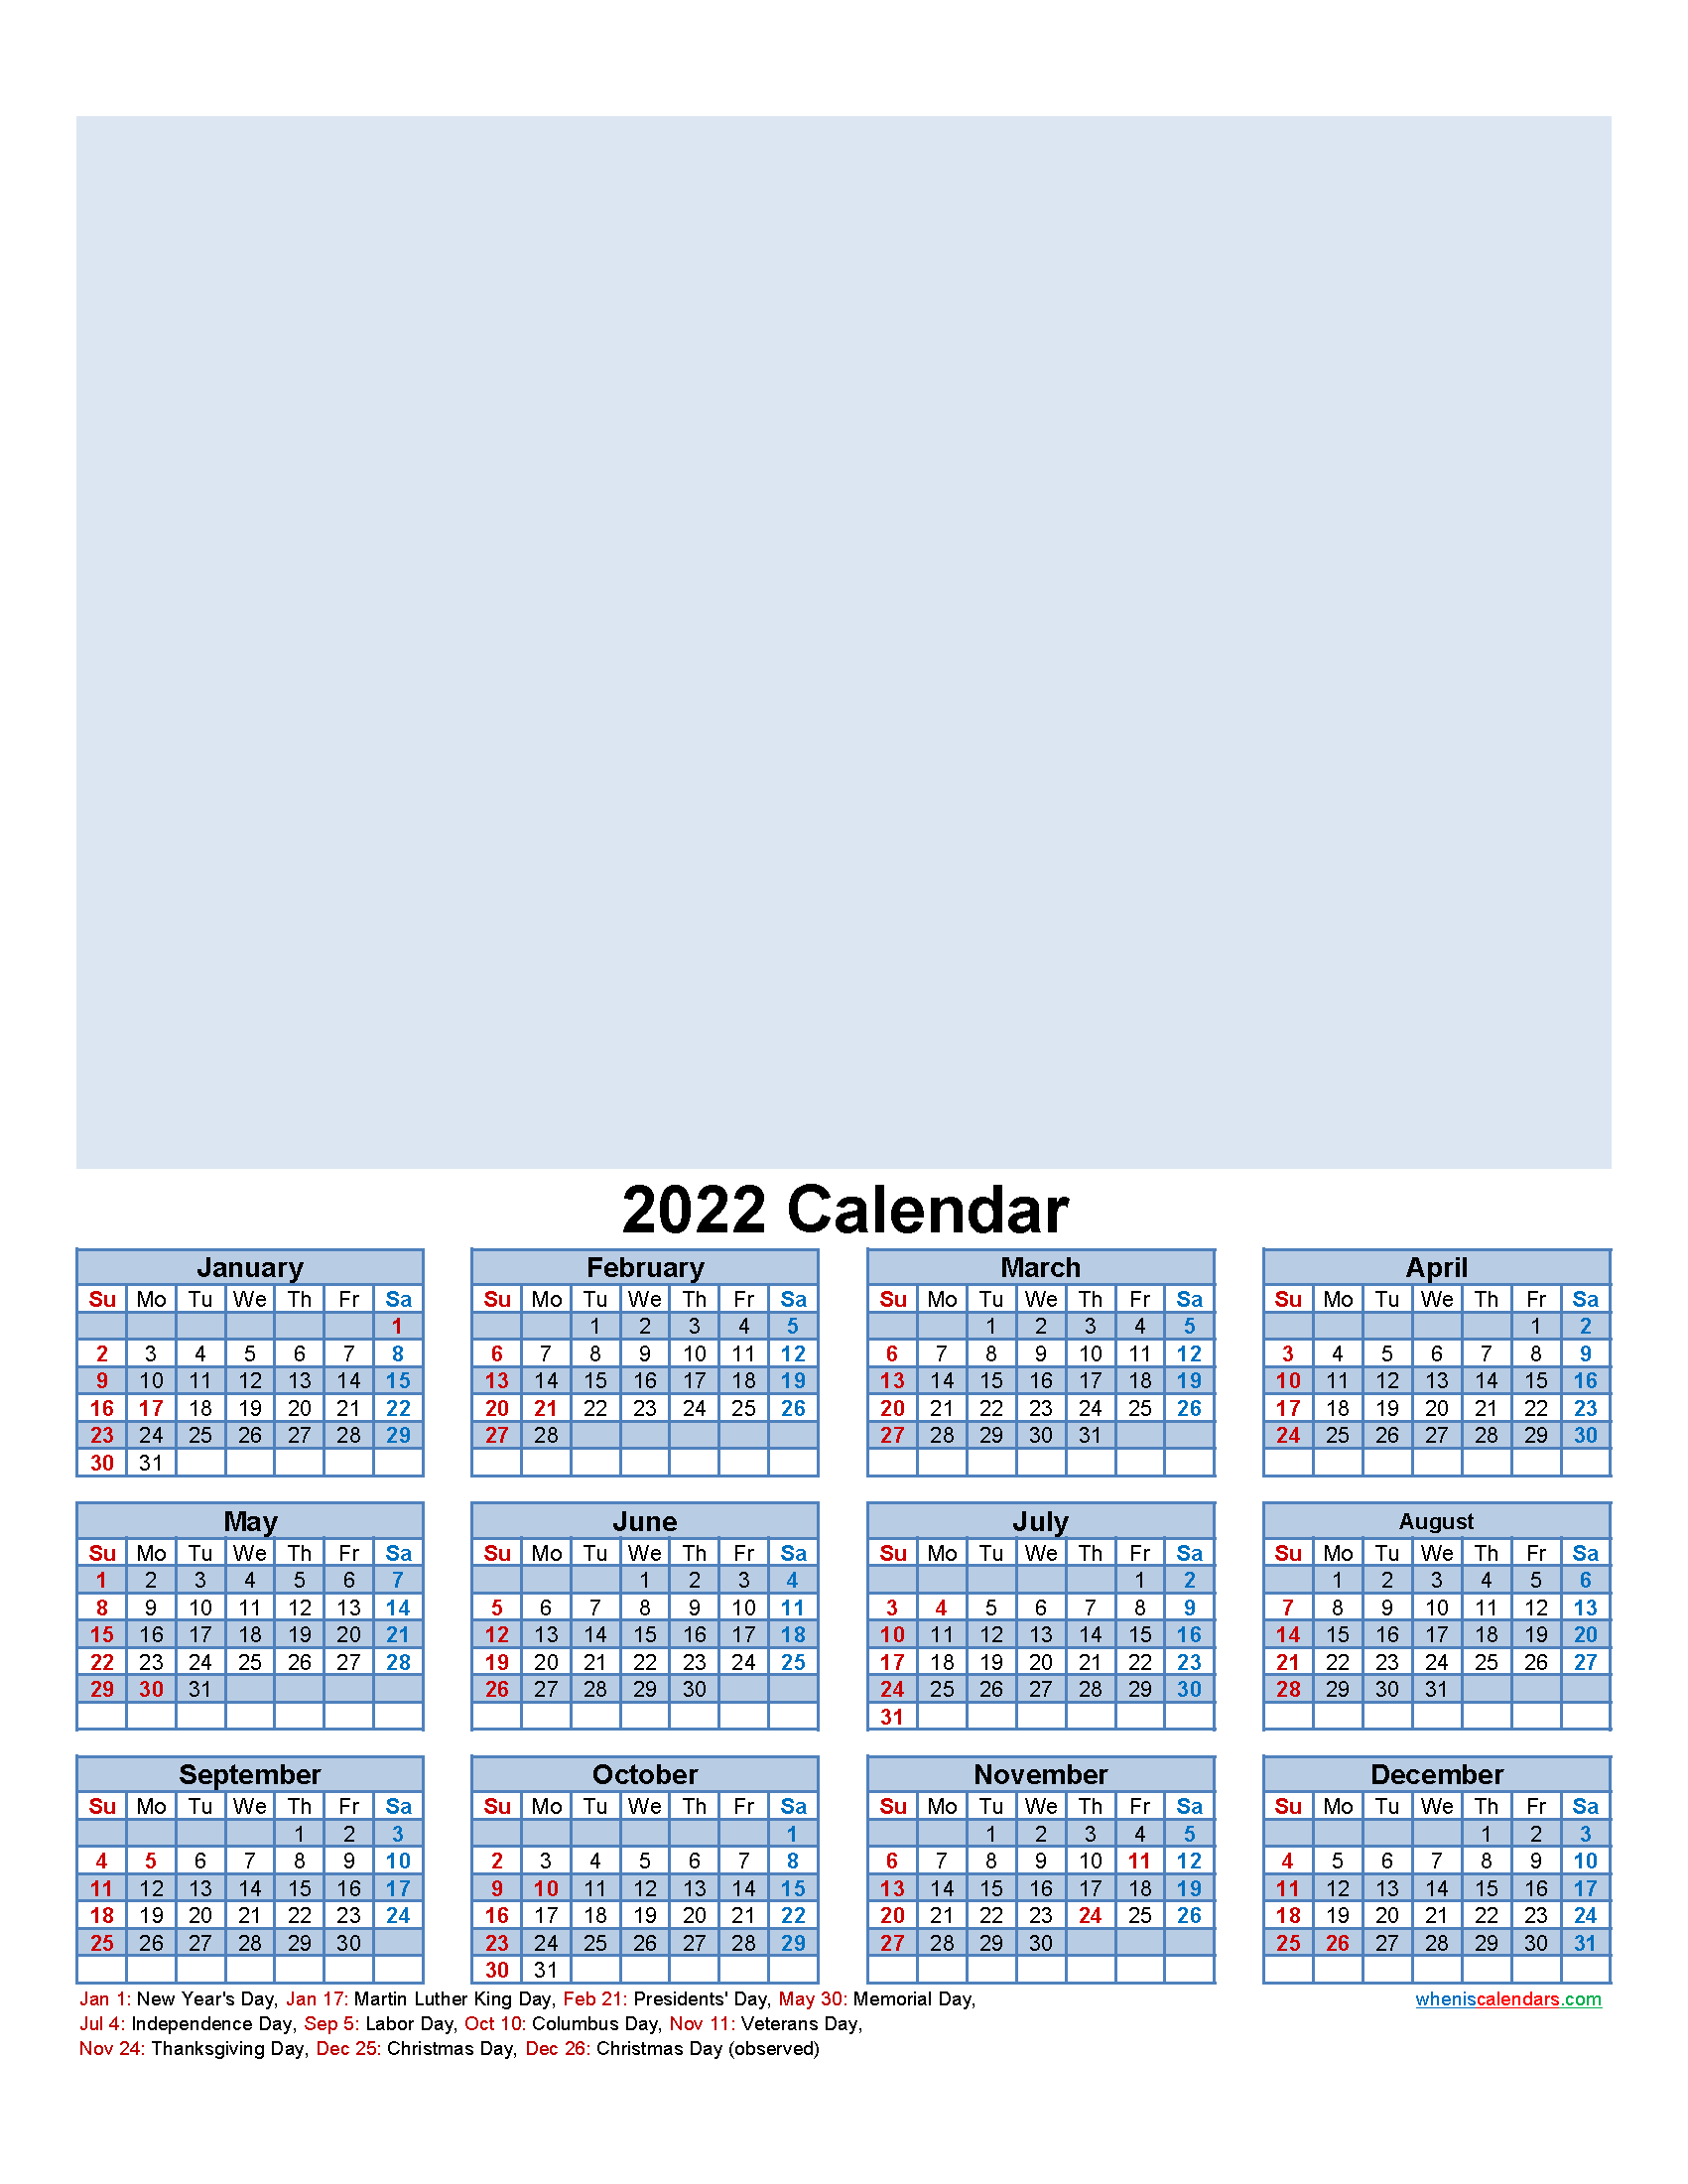 Download and customize the Free Personalised Printable Photo Calendar 2022 as Word and PDF